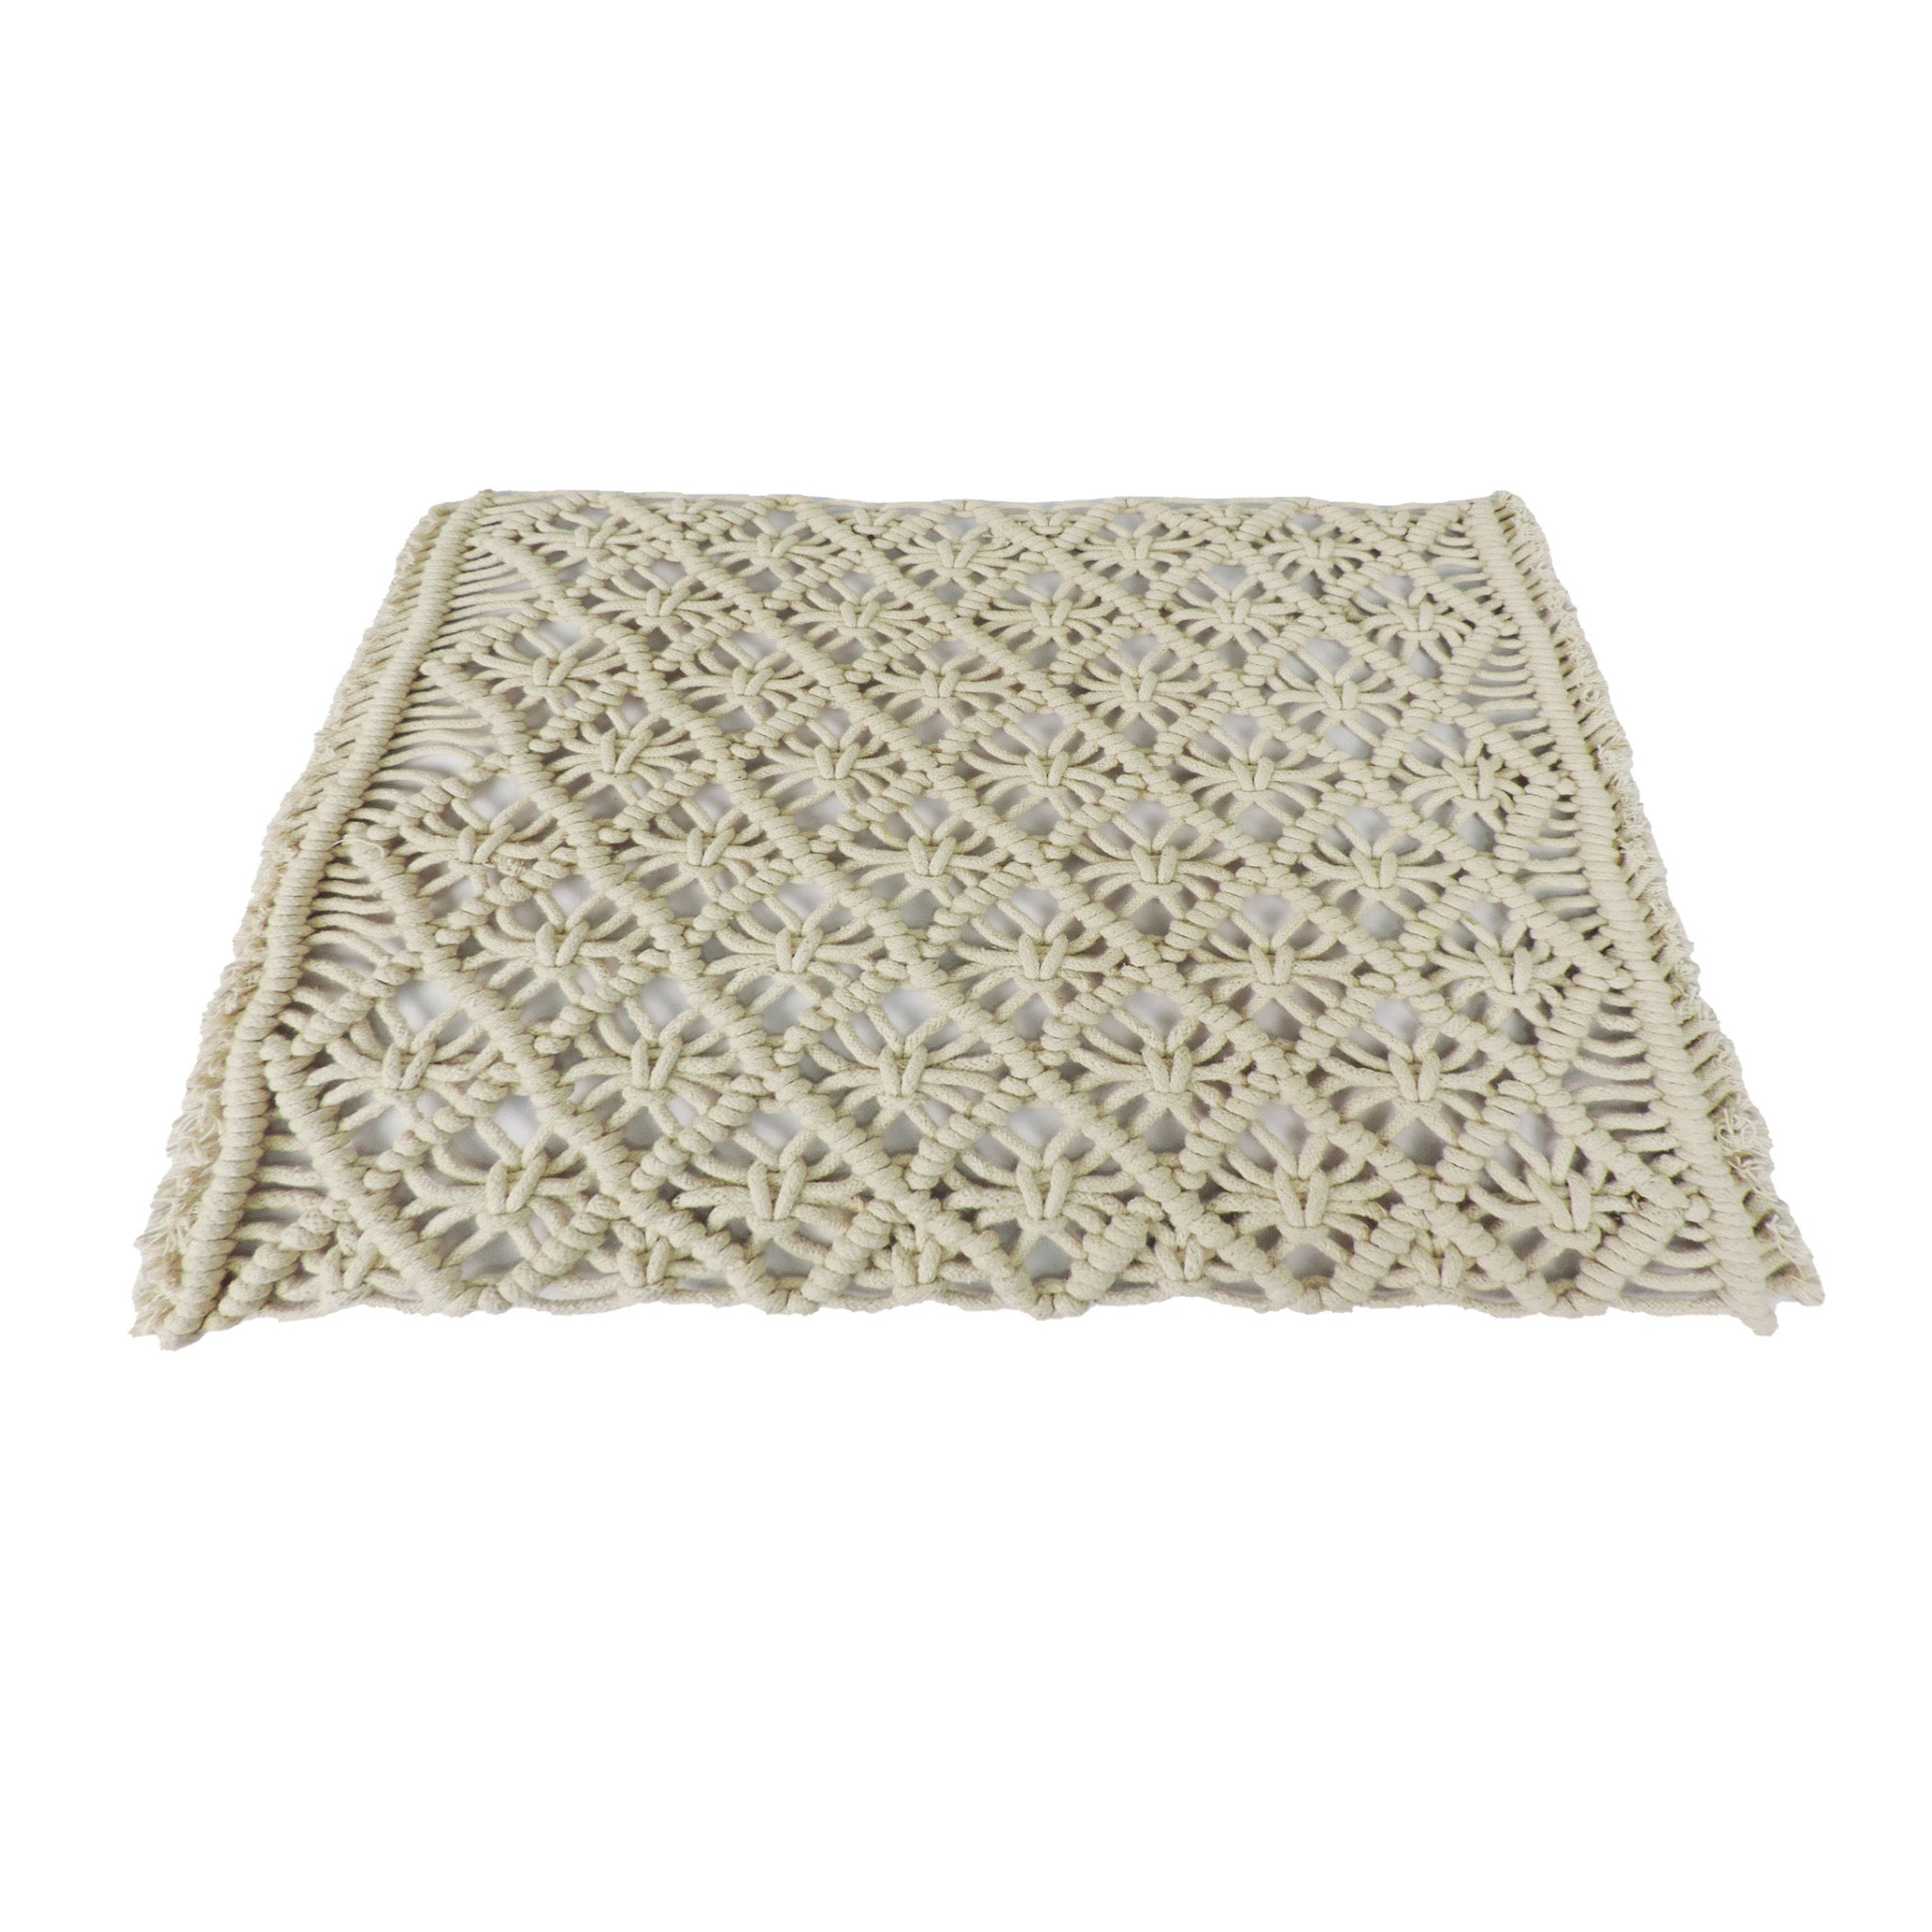 Macramé Placemat in White, Set of 2/4